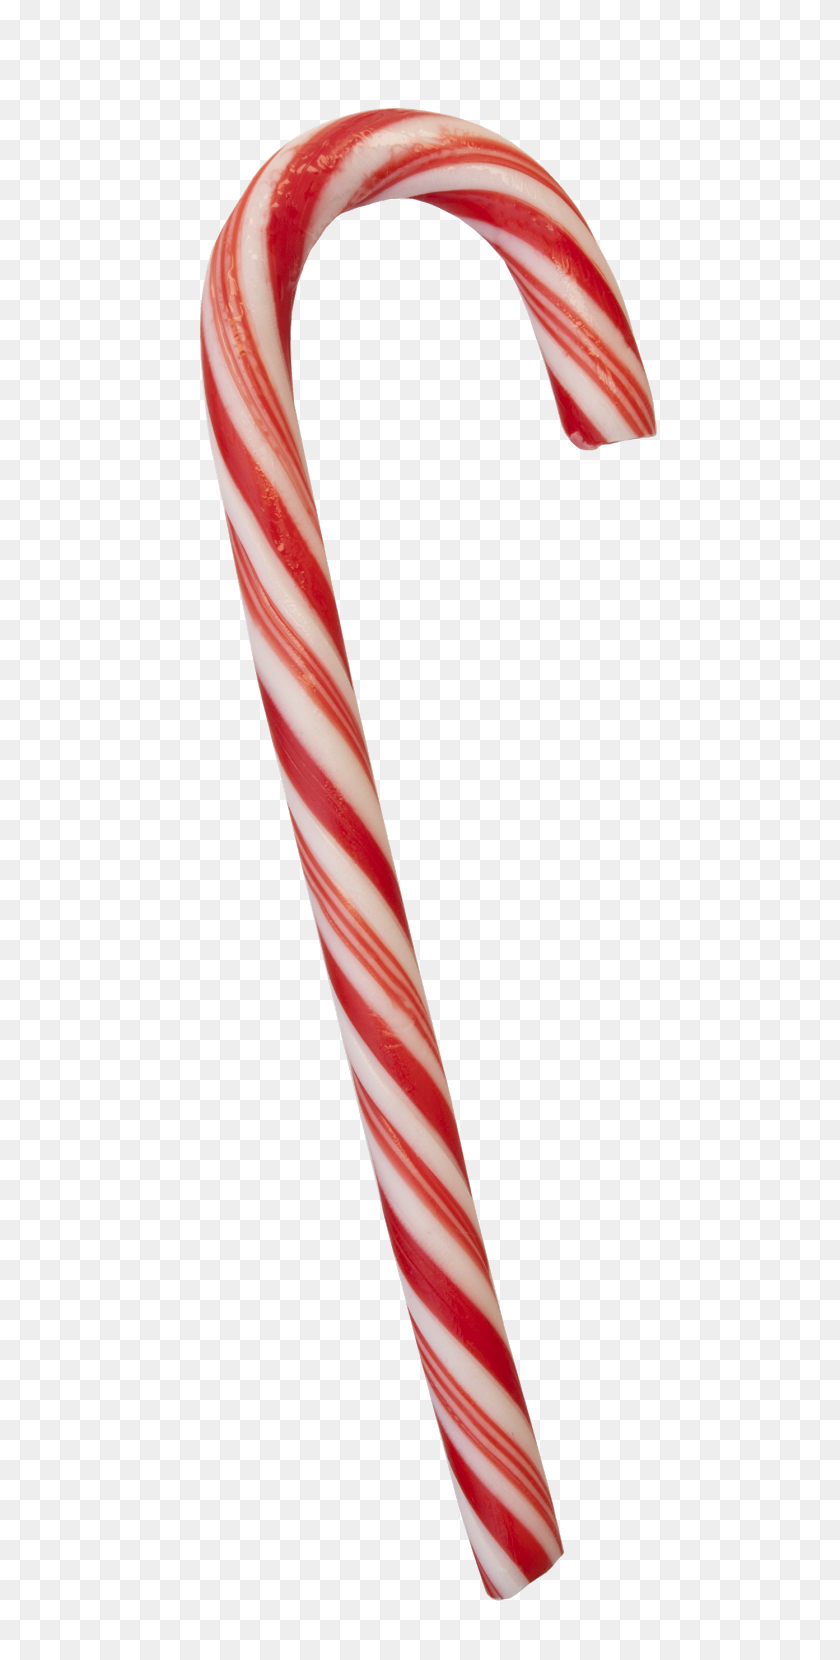 616x1600 Christmas Candy Png Images Free Download, Candy Png - Candy Cane PNG